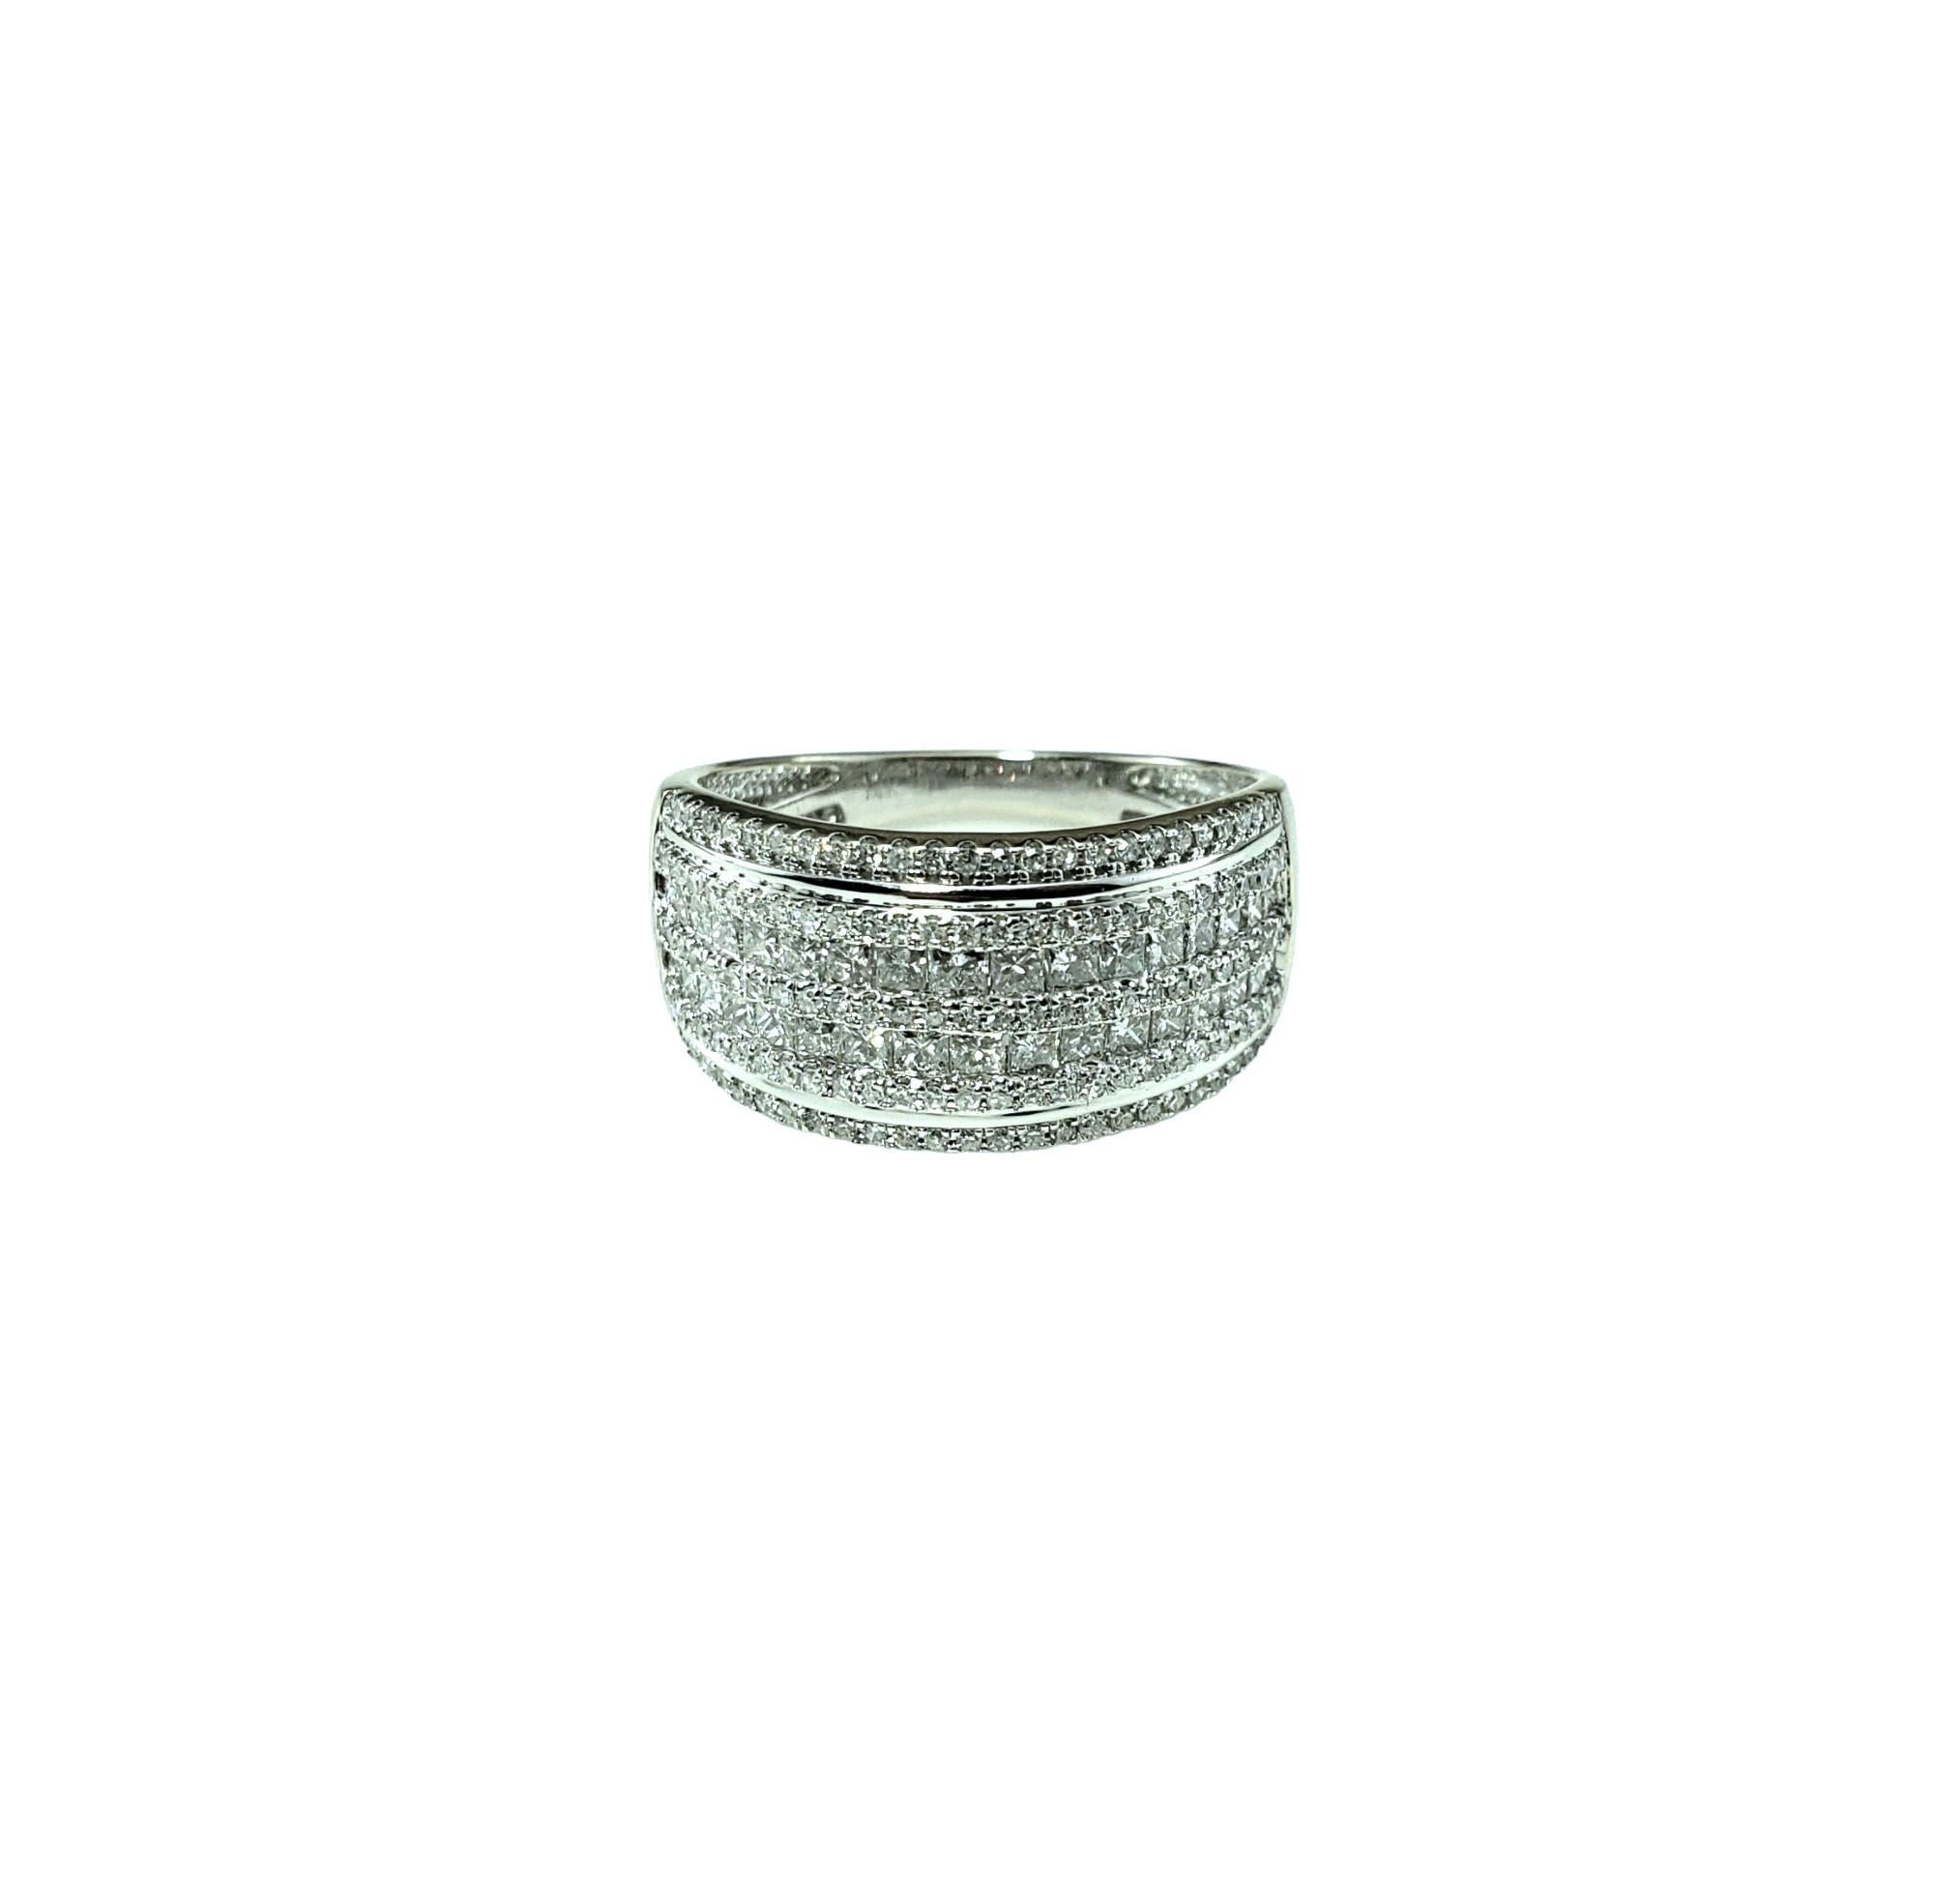 14K White Gold Diamond Band Ring Size 7.5-

This sparkling band features 34 princess cut diamonds and 146 round single cut diamonds set in classic 14K white gold. 

 Width:  10 mm.  Shank: 2 mm.

Approximate total diamond weight:  1.75 ct.

Diamond